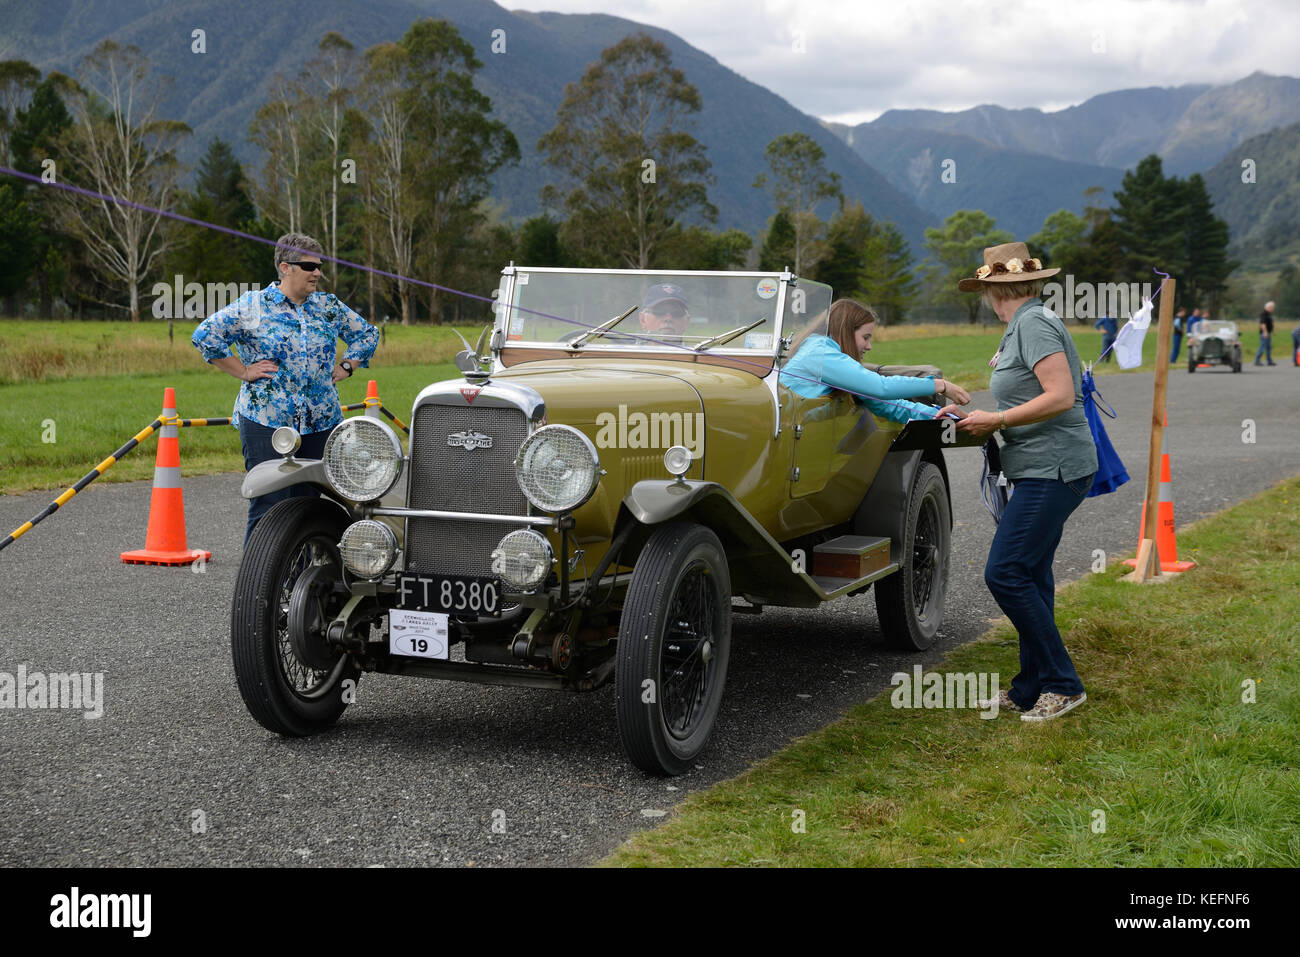 HAUPIRI, NEW ZEALAND, MARCH 18, 2017: Contestants in a vintage car rally hang out washing in a timed competition. The vehicle is a 1930 Alvis  Silver  Stock Photo